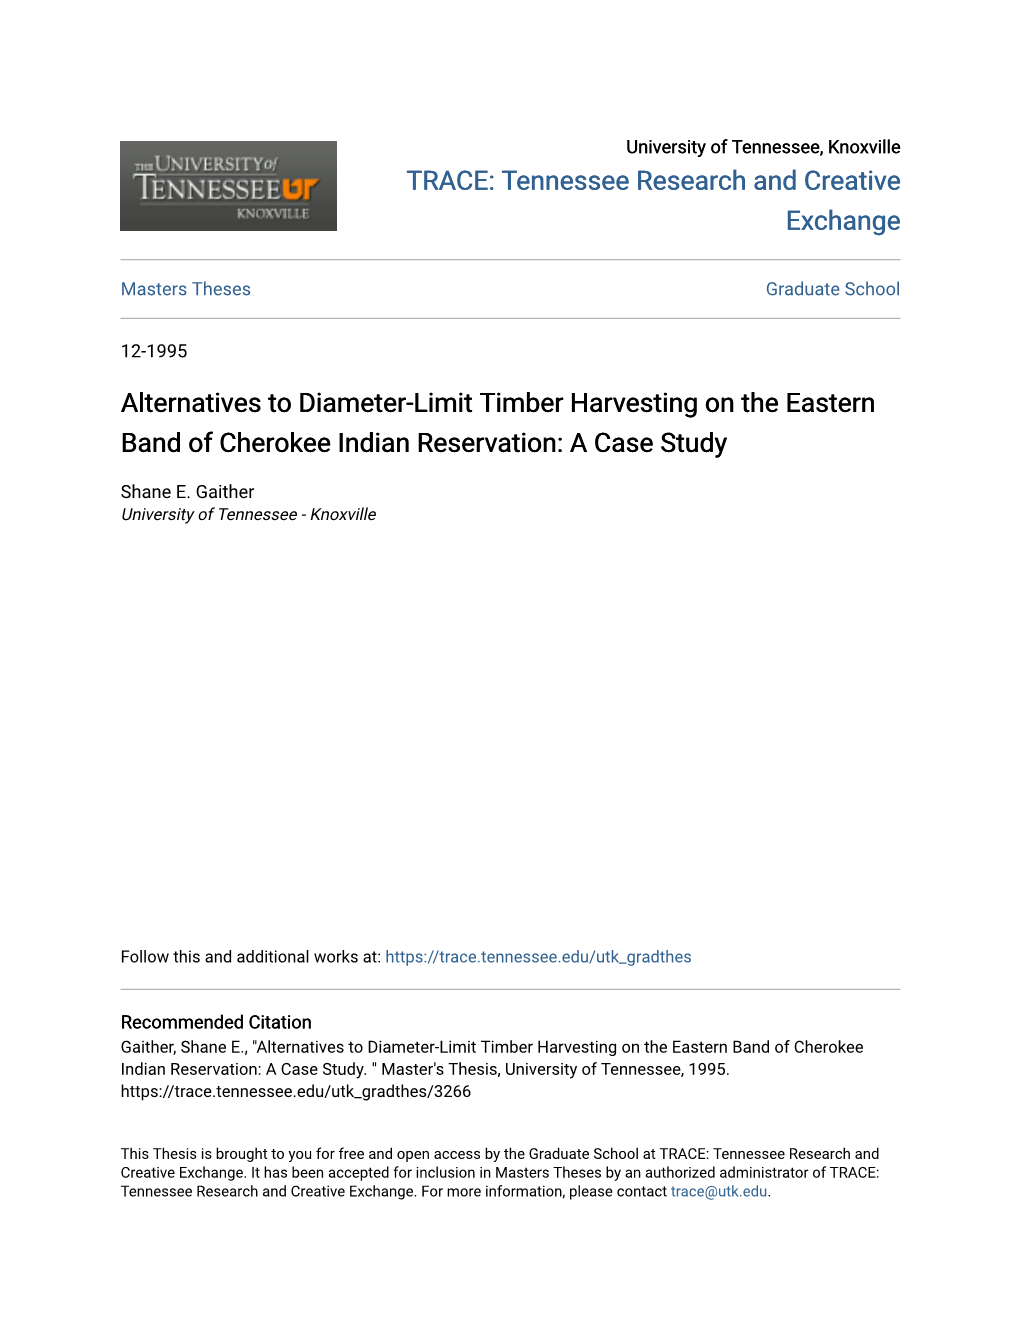 Alternatives to Diameter-Limit Timber Harvesting on the Eastern Band of Cherokee Indian Reservation: a Case Study